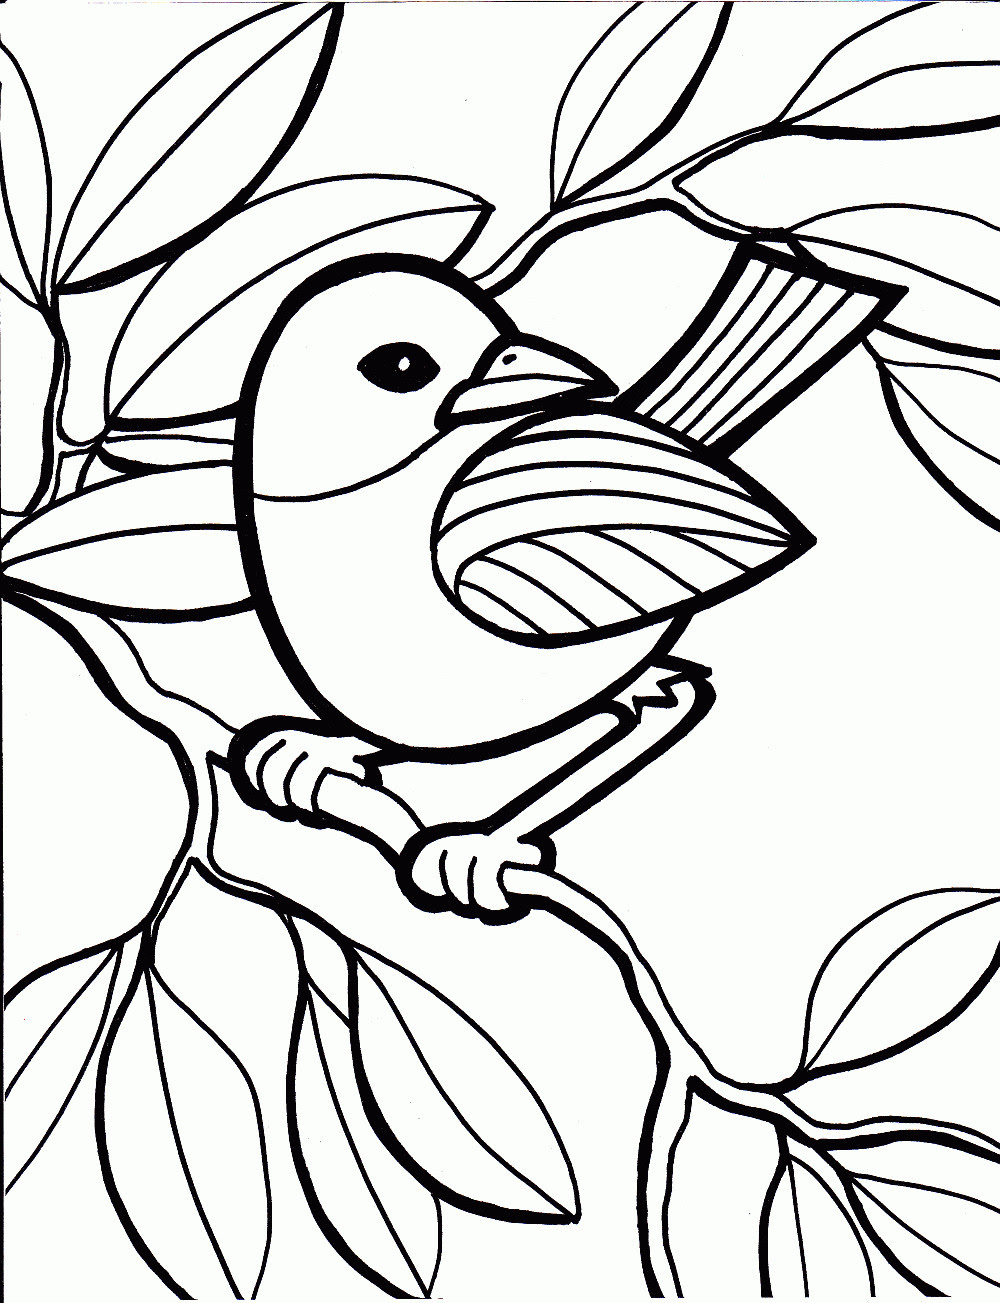 Coloring Pages For Elderly at GetDrawings | Free download Easy coloring book for adults: